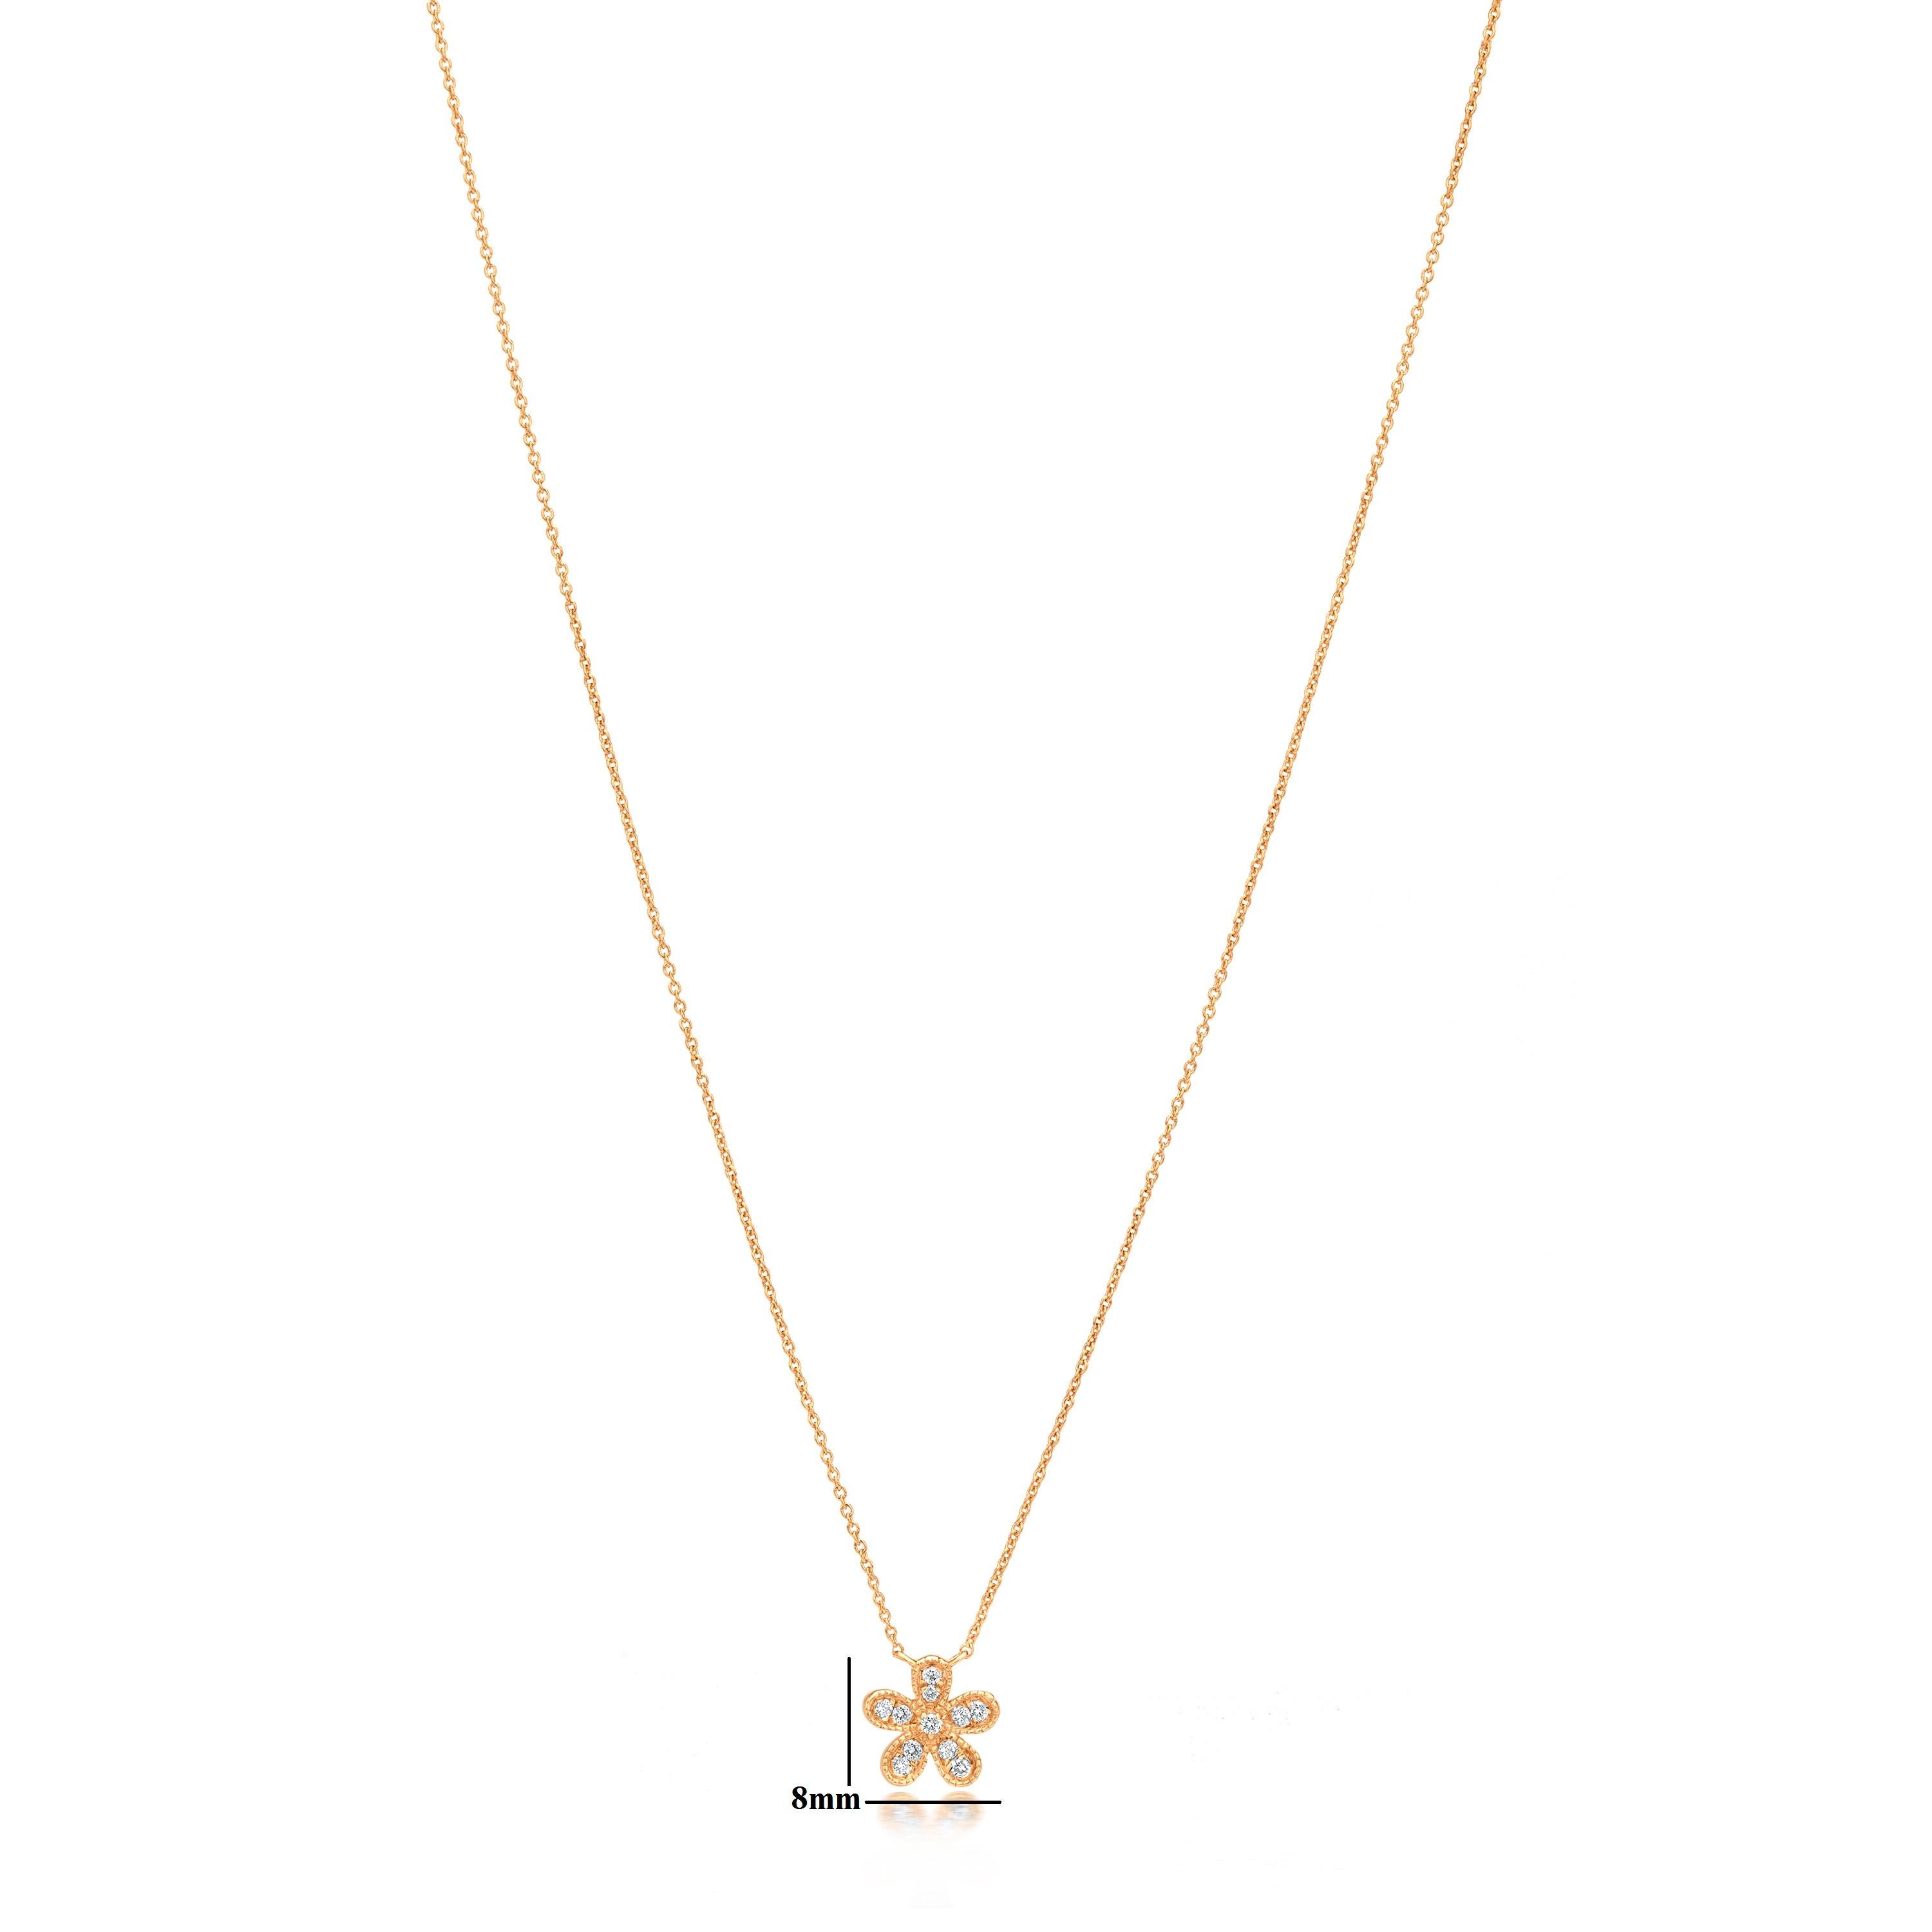 Contemporary Luxle Flower Diamond Pendant Necklace in 18K Yellow Gold